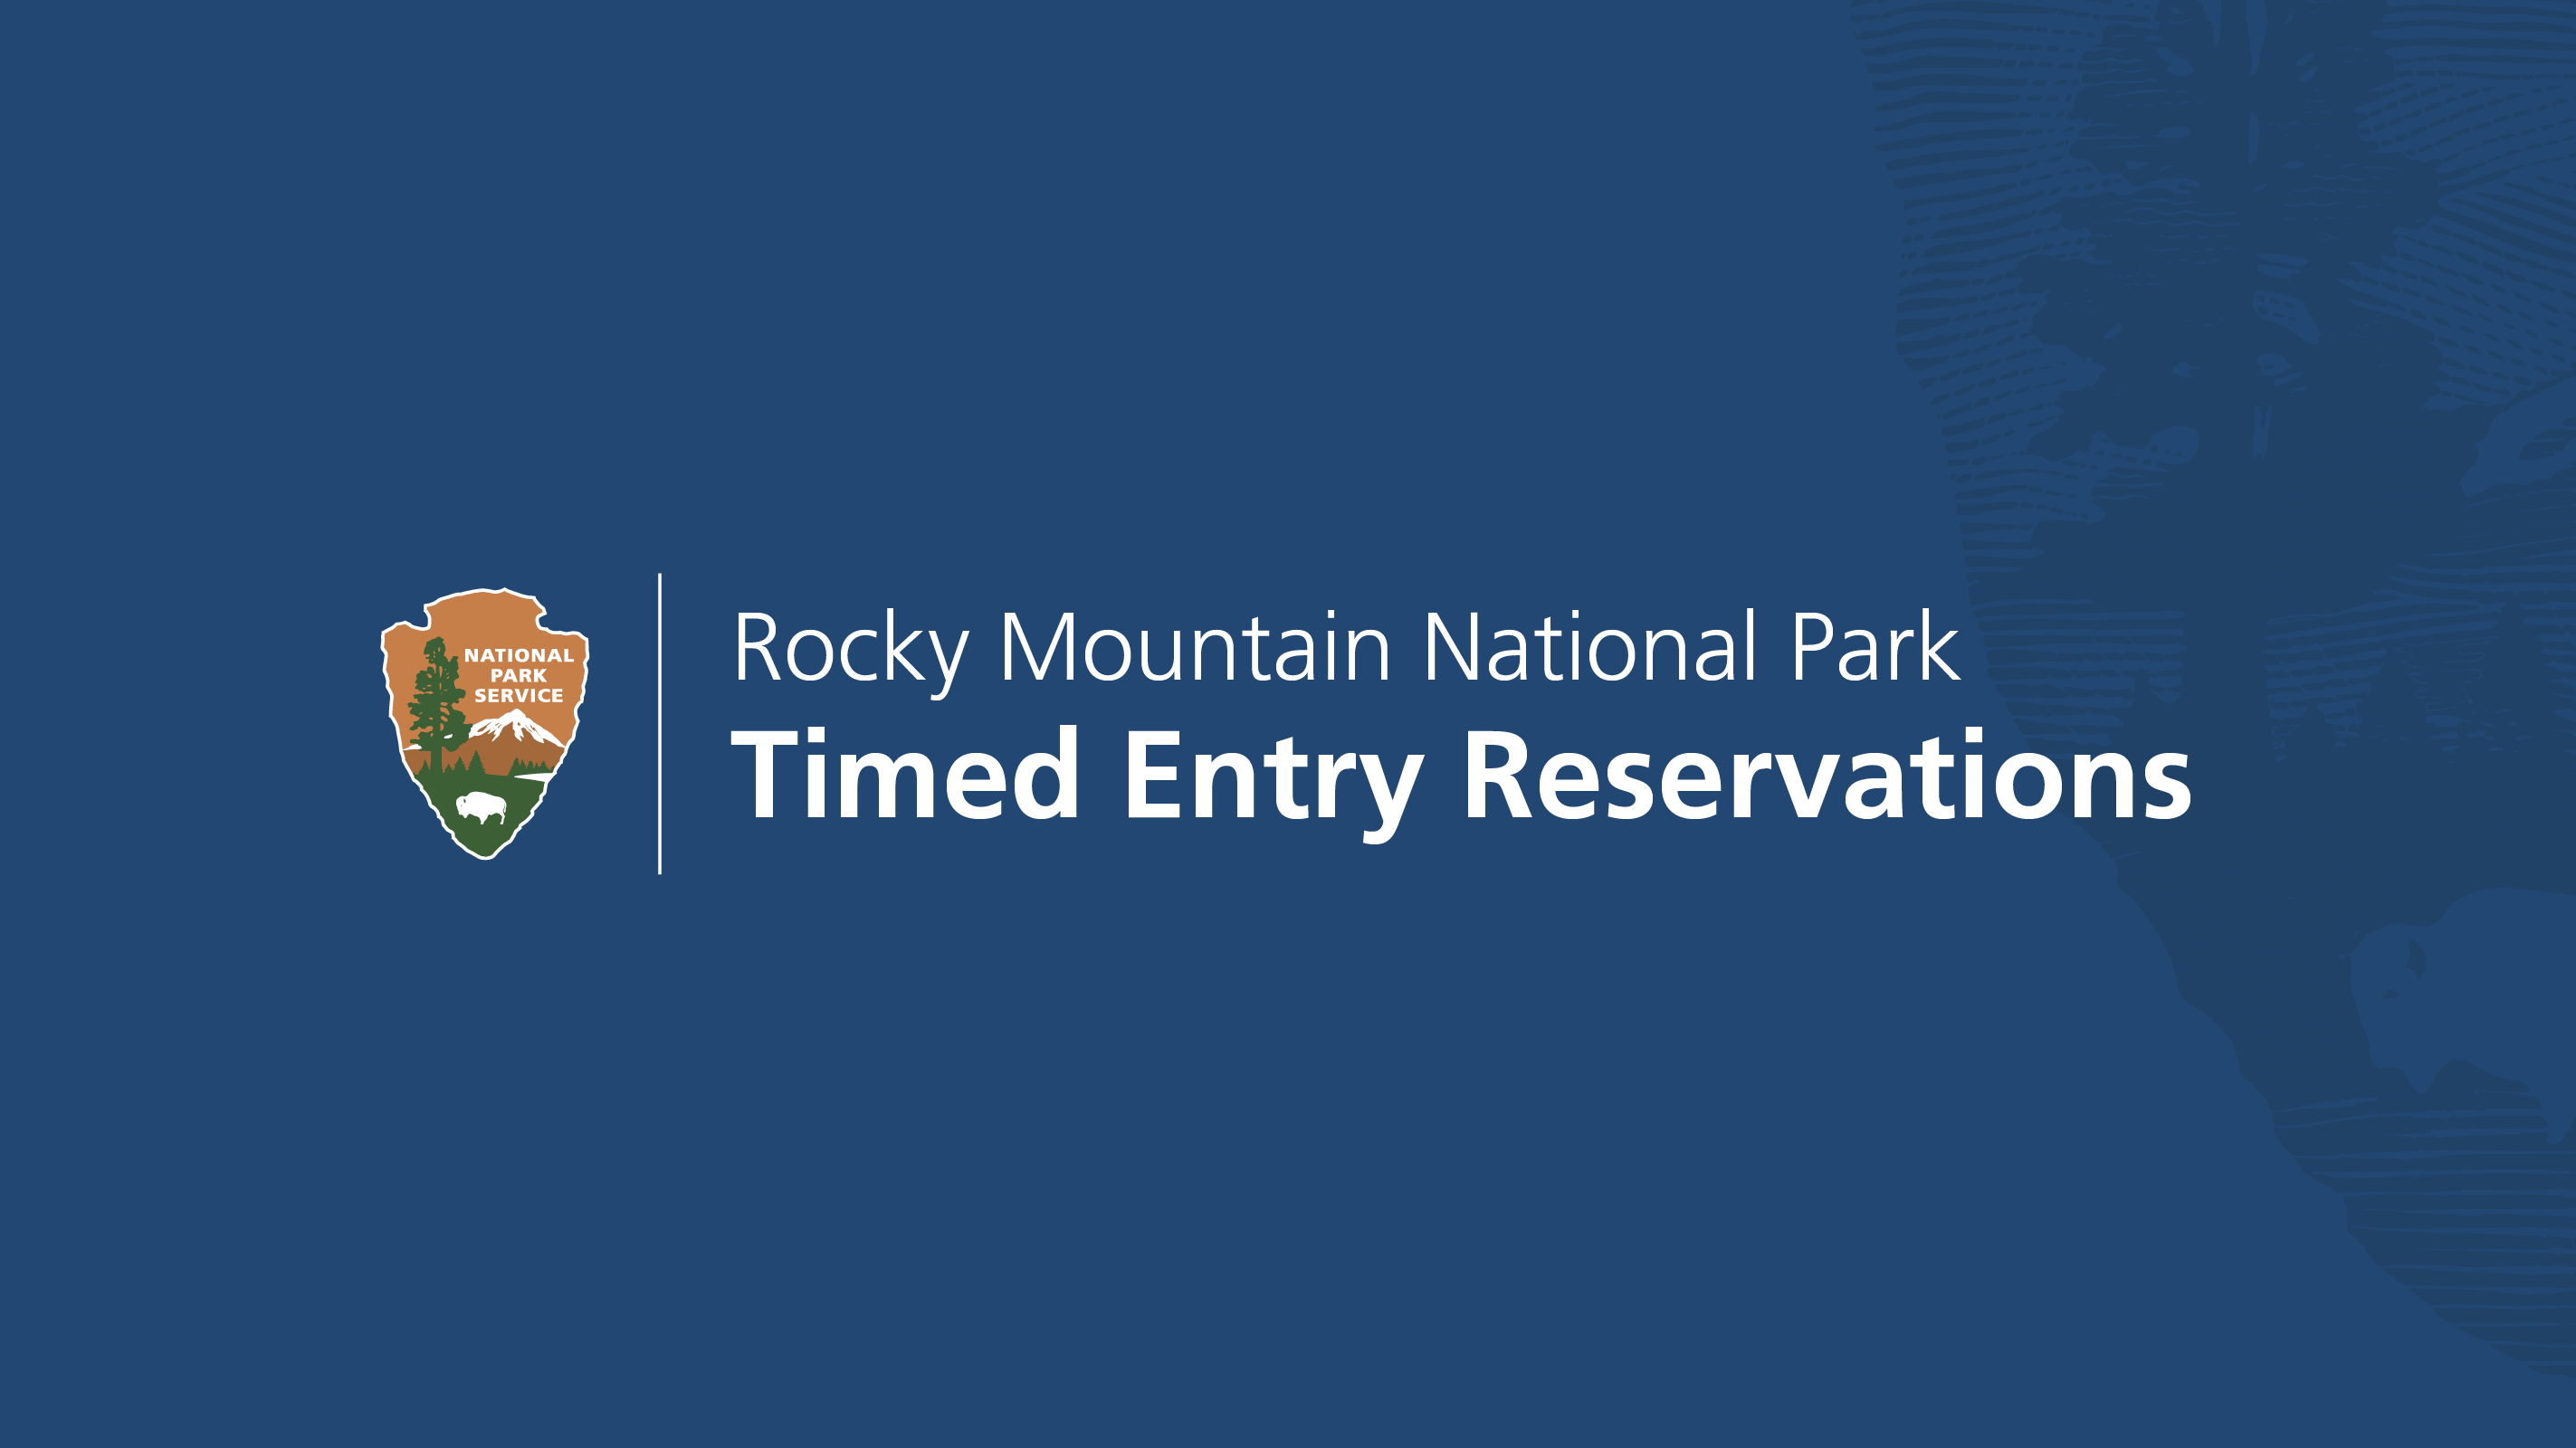 Image with blue background and the text "Timed Entry Permit Reservations"